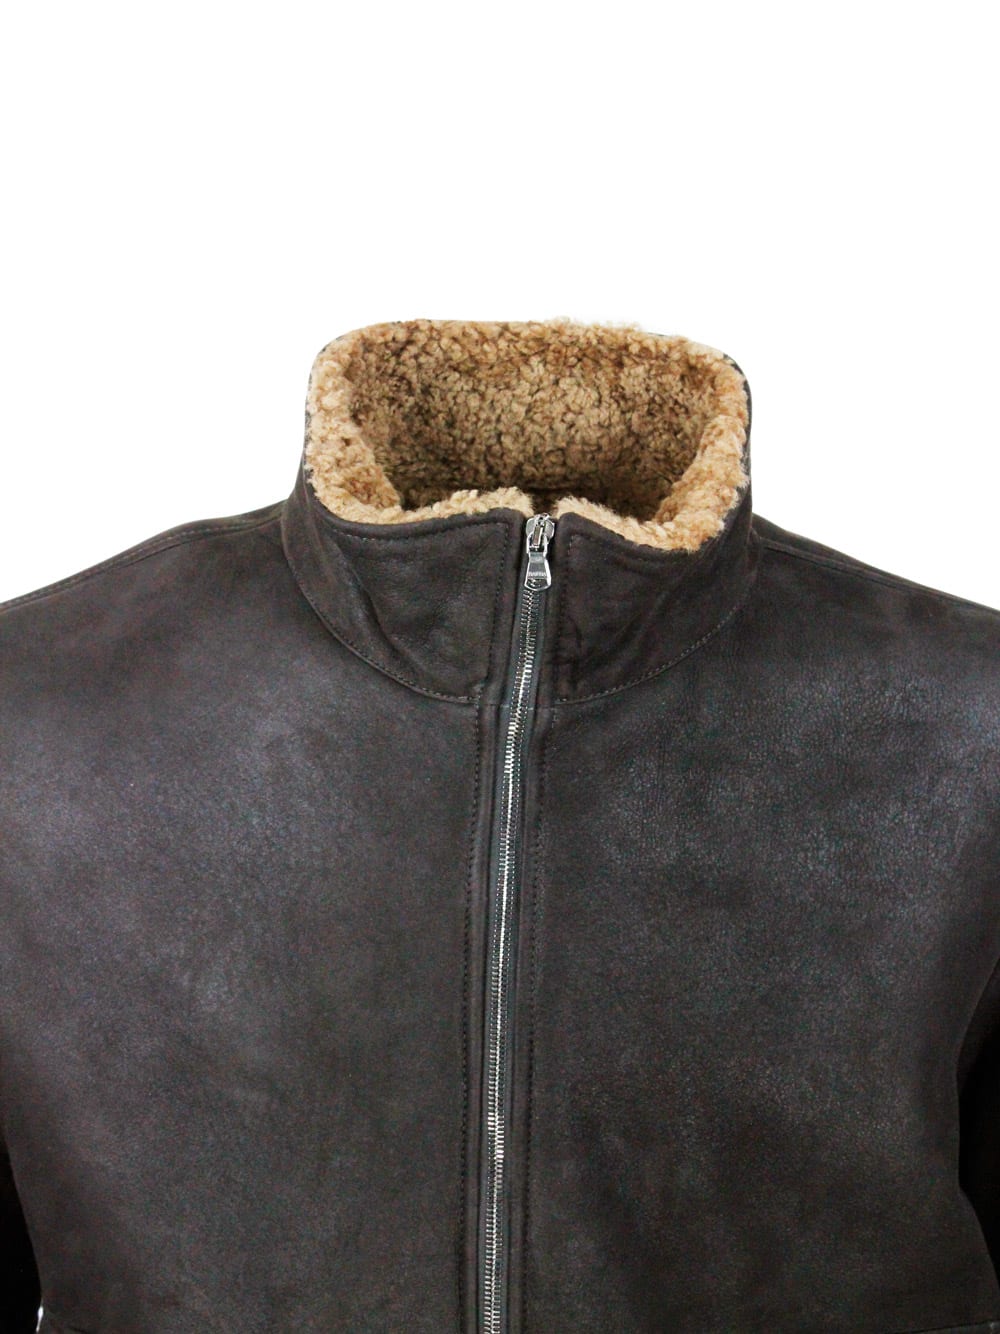 Shop Barba Napoli Bomber Jacket In Fine And Soft Shearling Sheepskin With Stretch Knit Trims And Zip Closure. Front Po In Brown